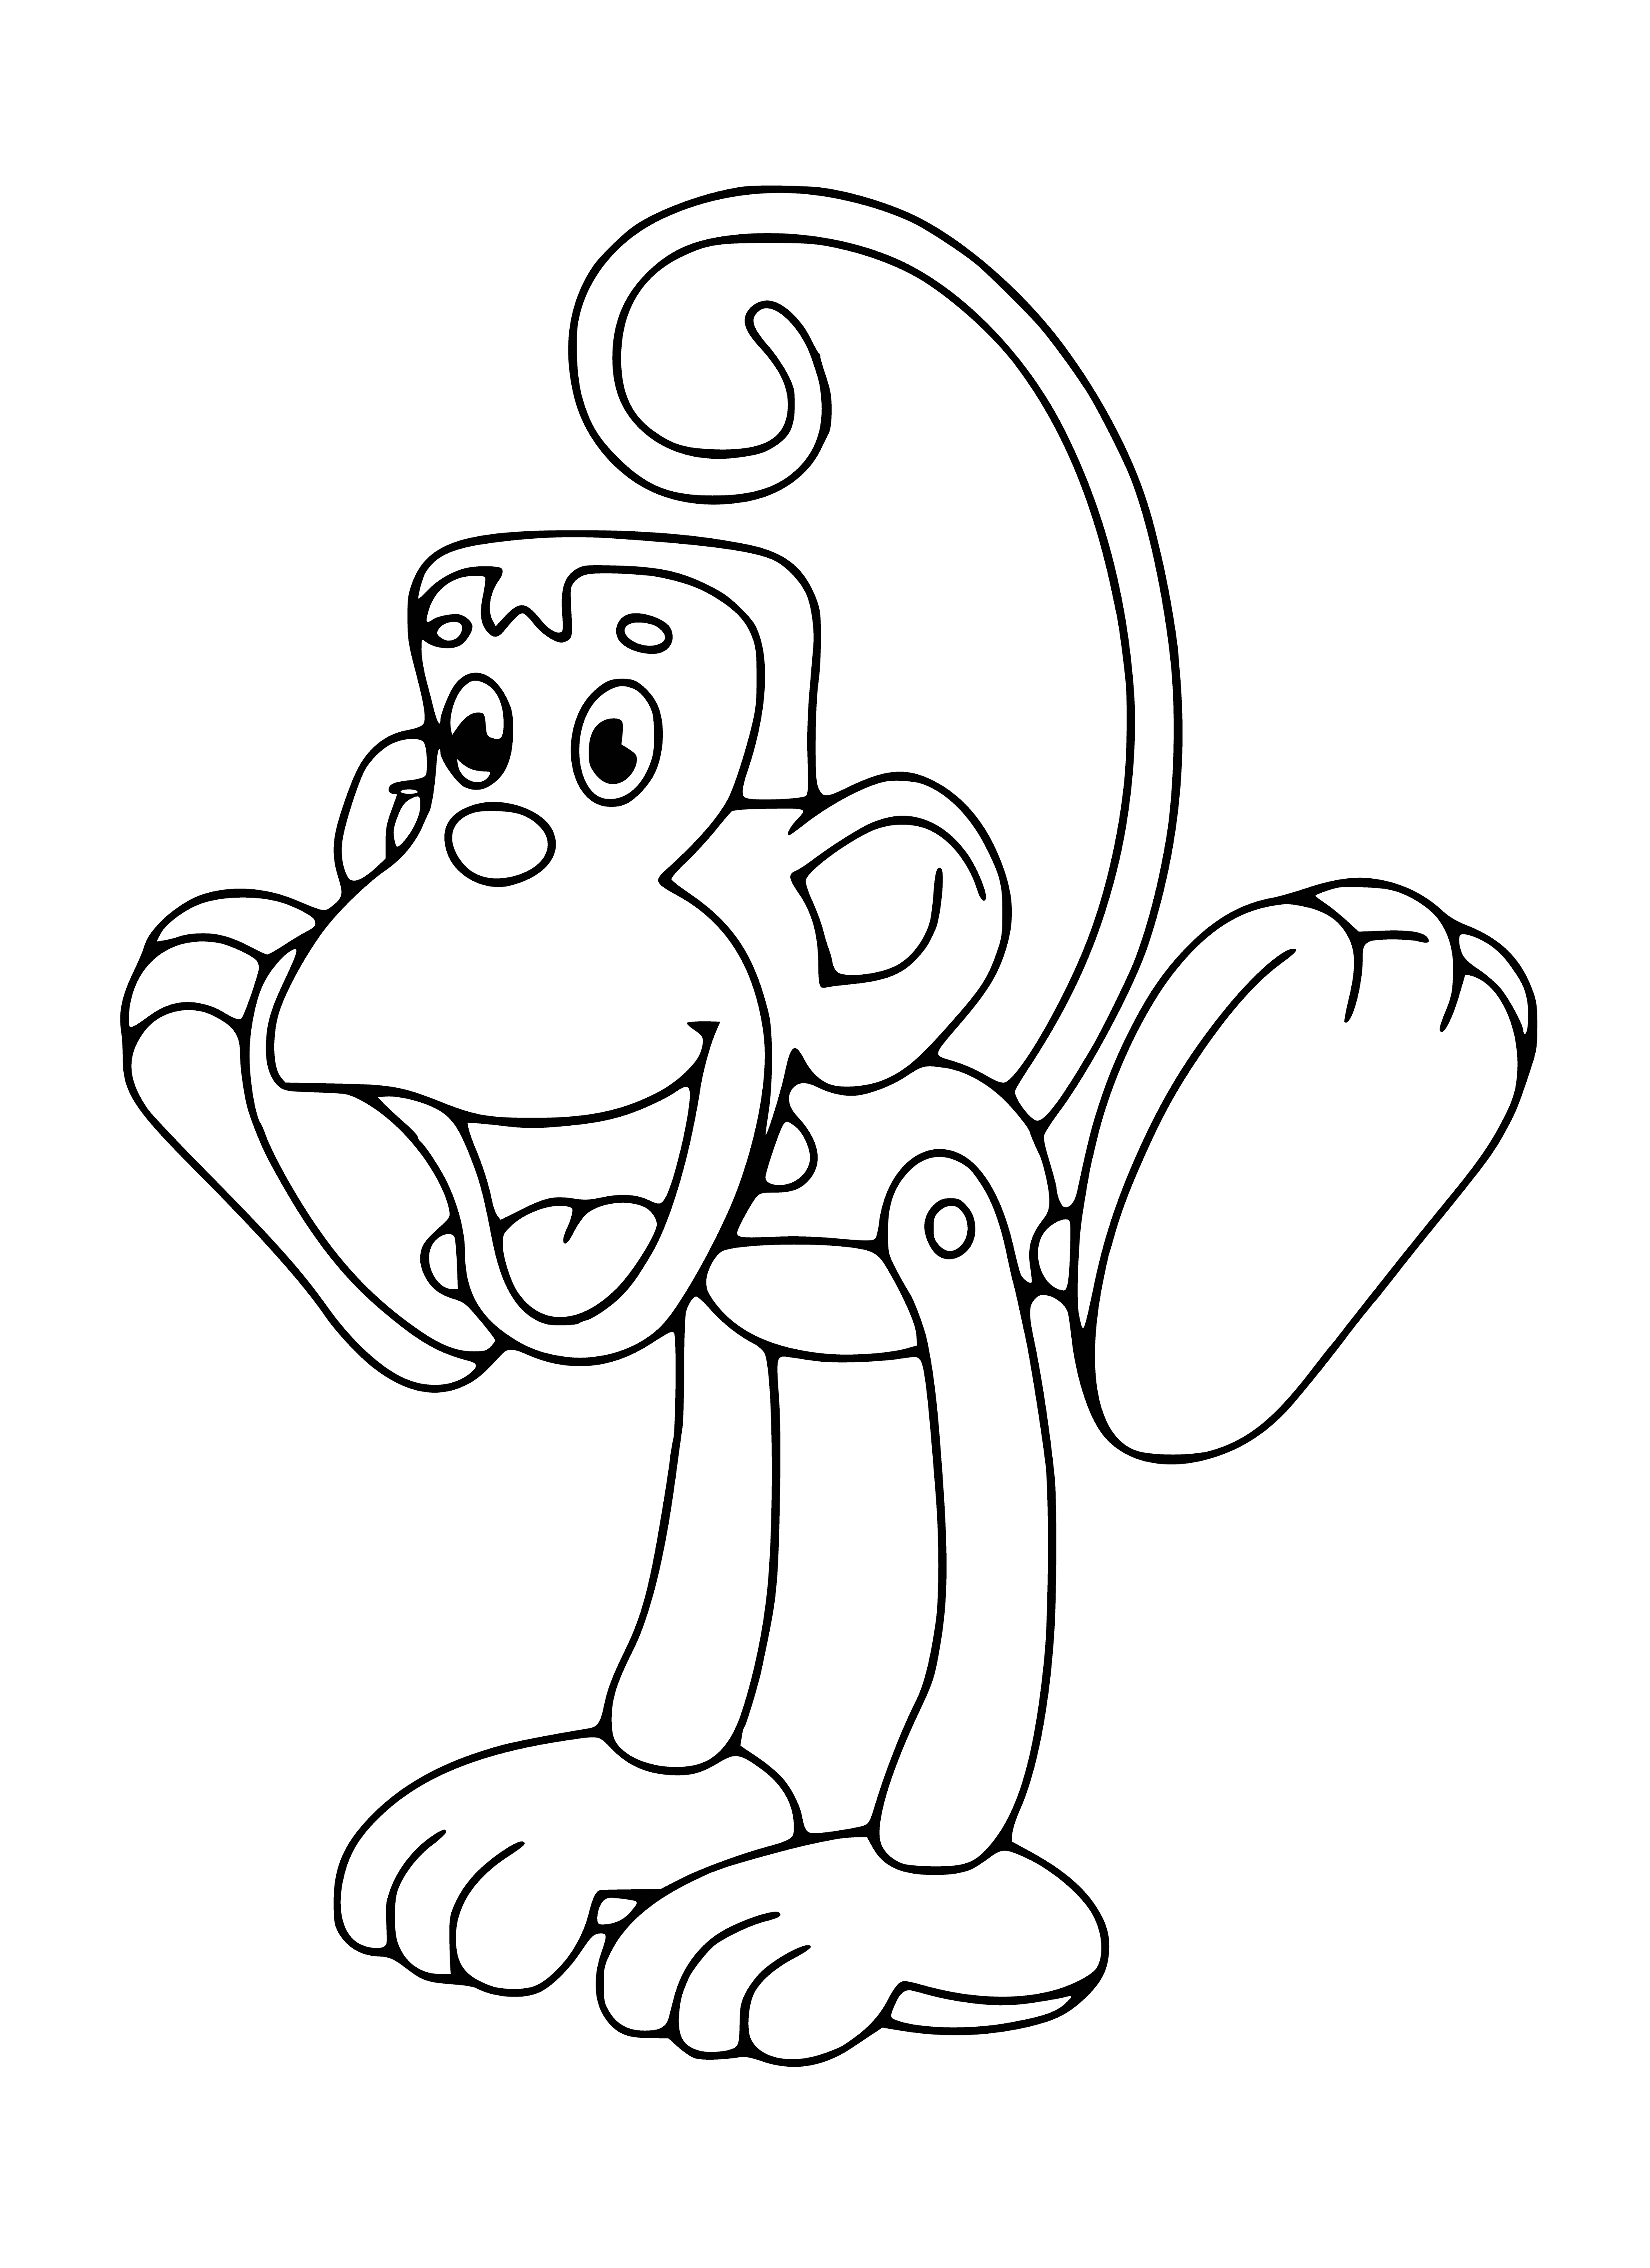 Circus monkey coloring page